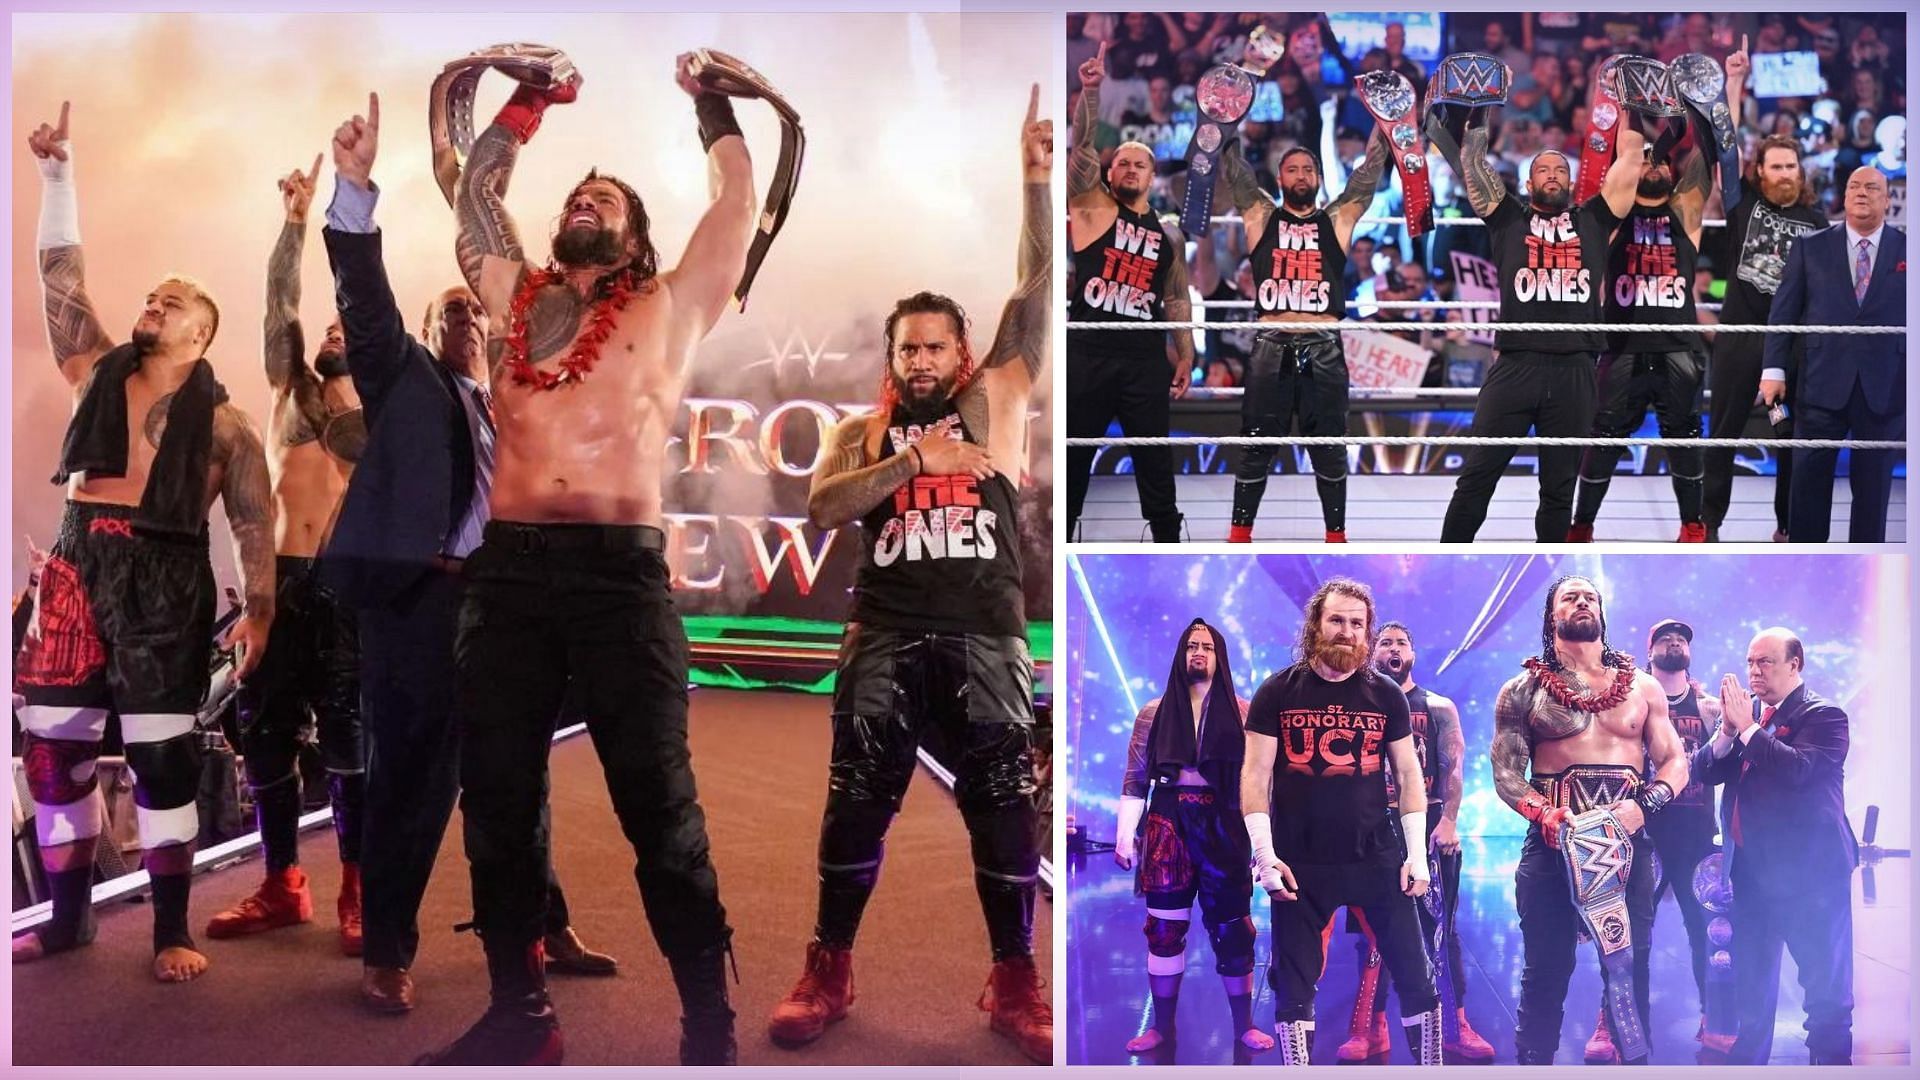 WWE Superstar Roman Reigns and the rest of The Bloodline